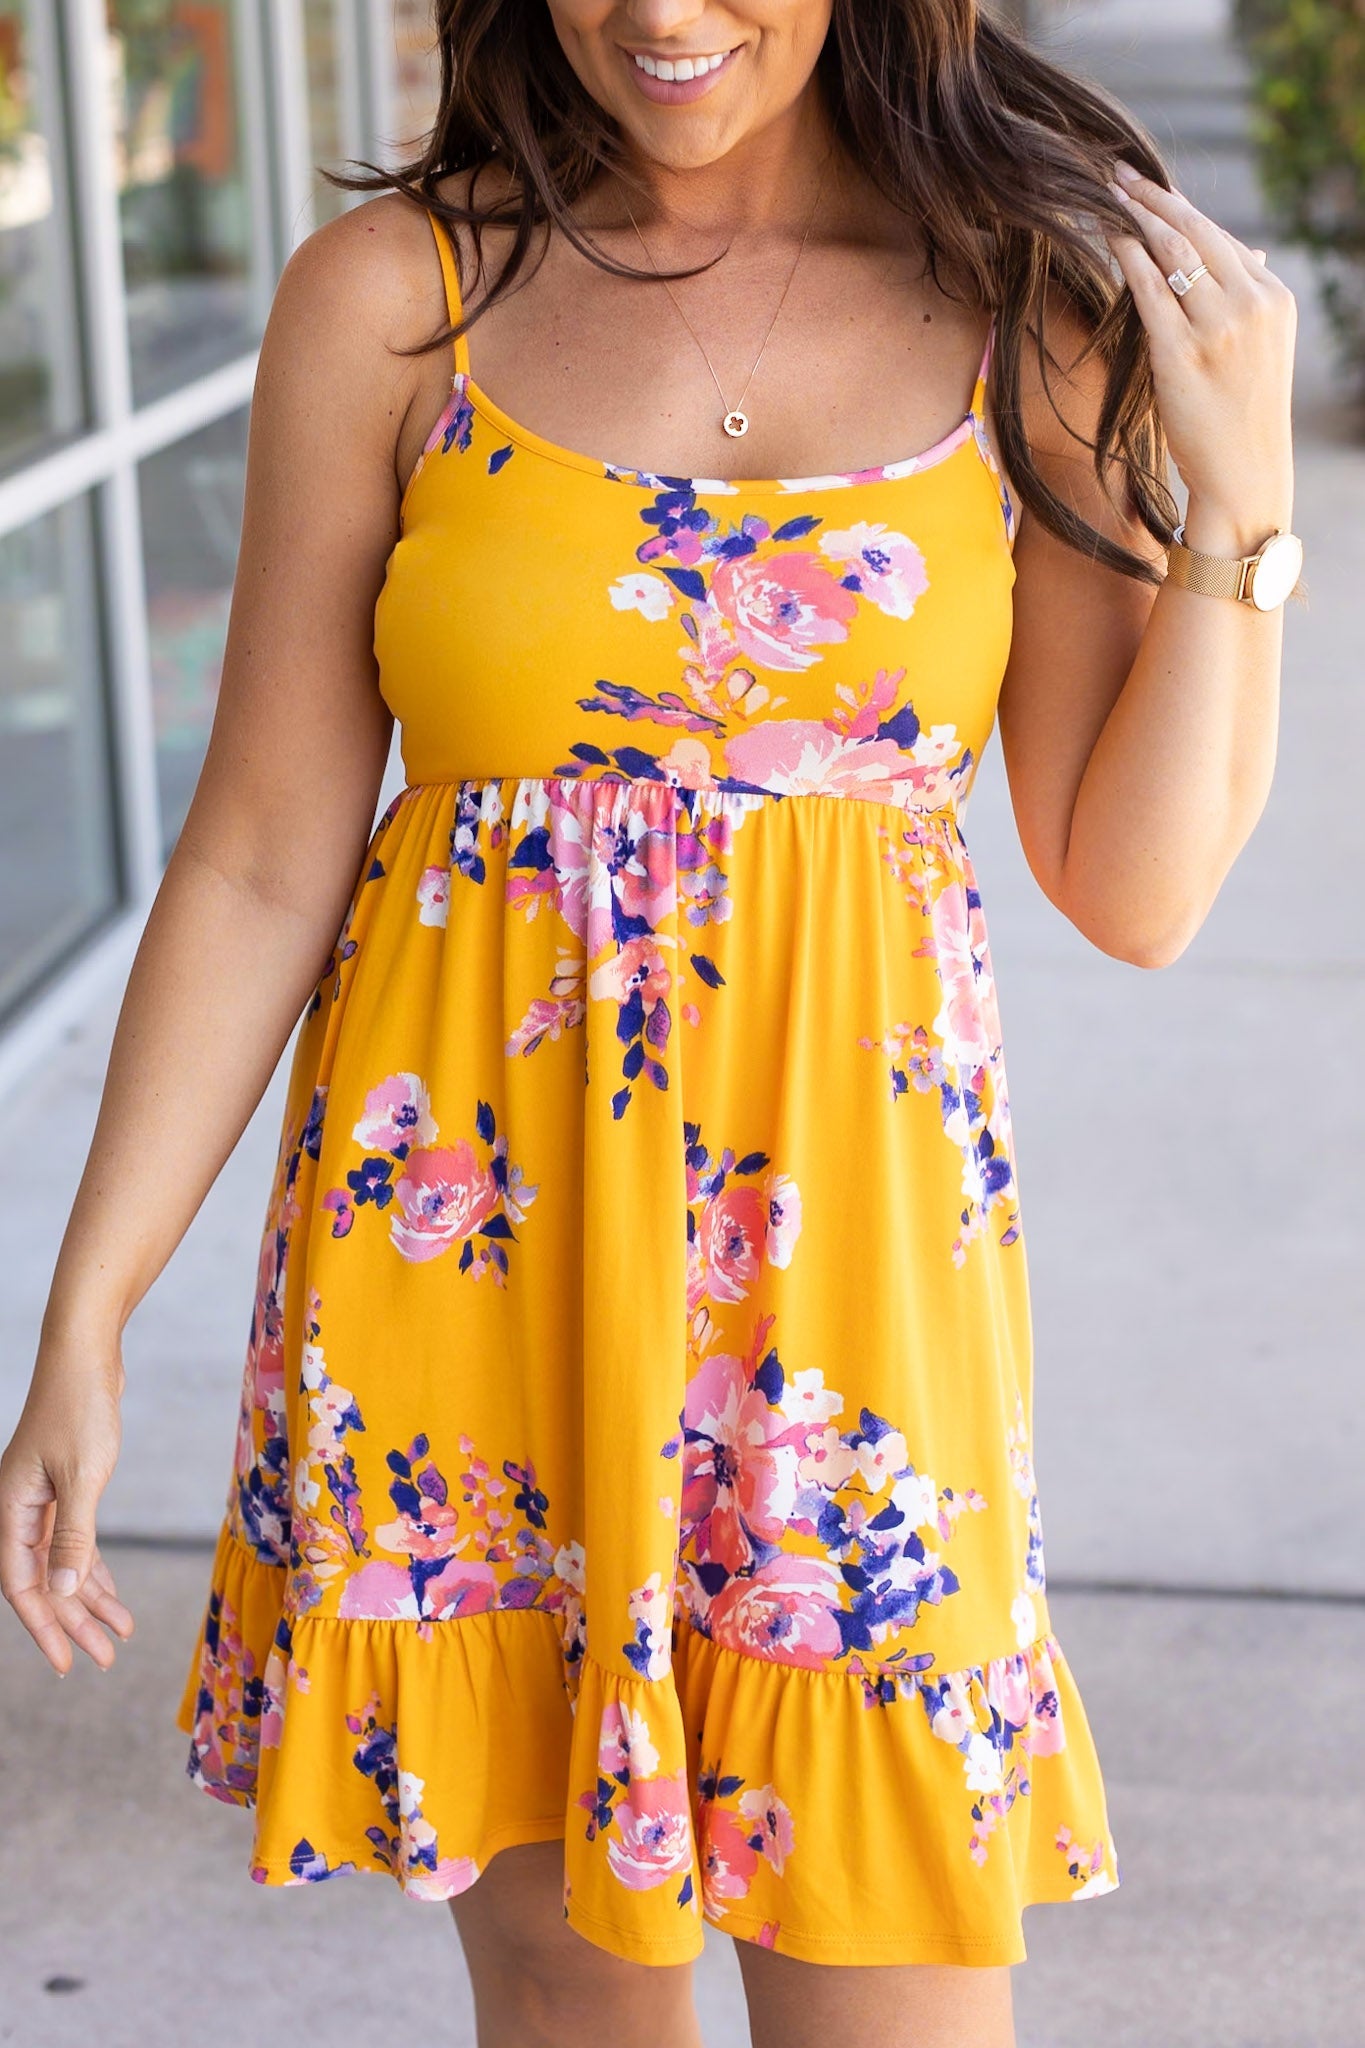 Rory Ruffle Dress - Golden Floral